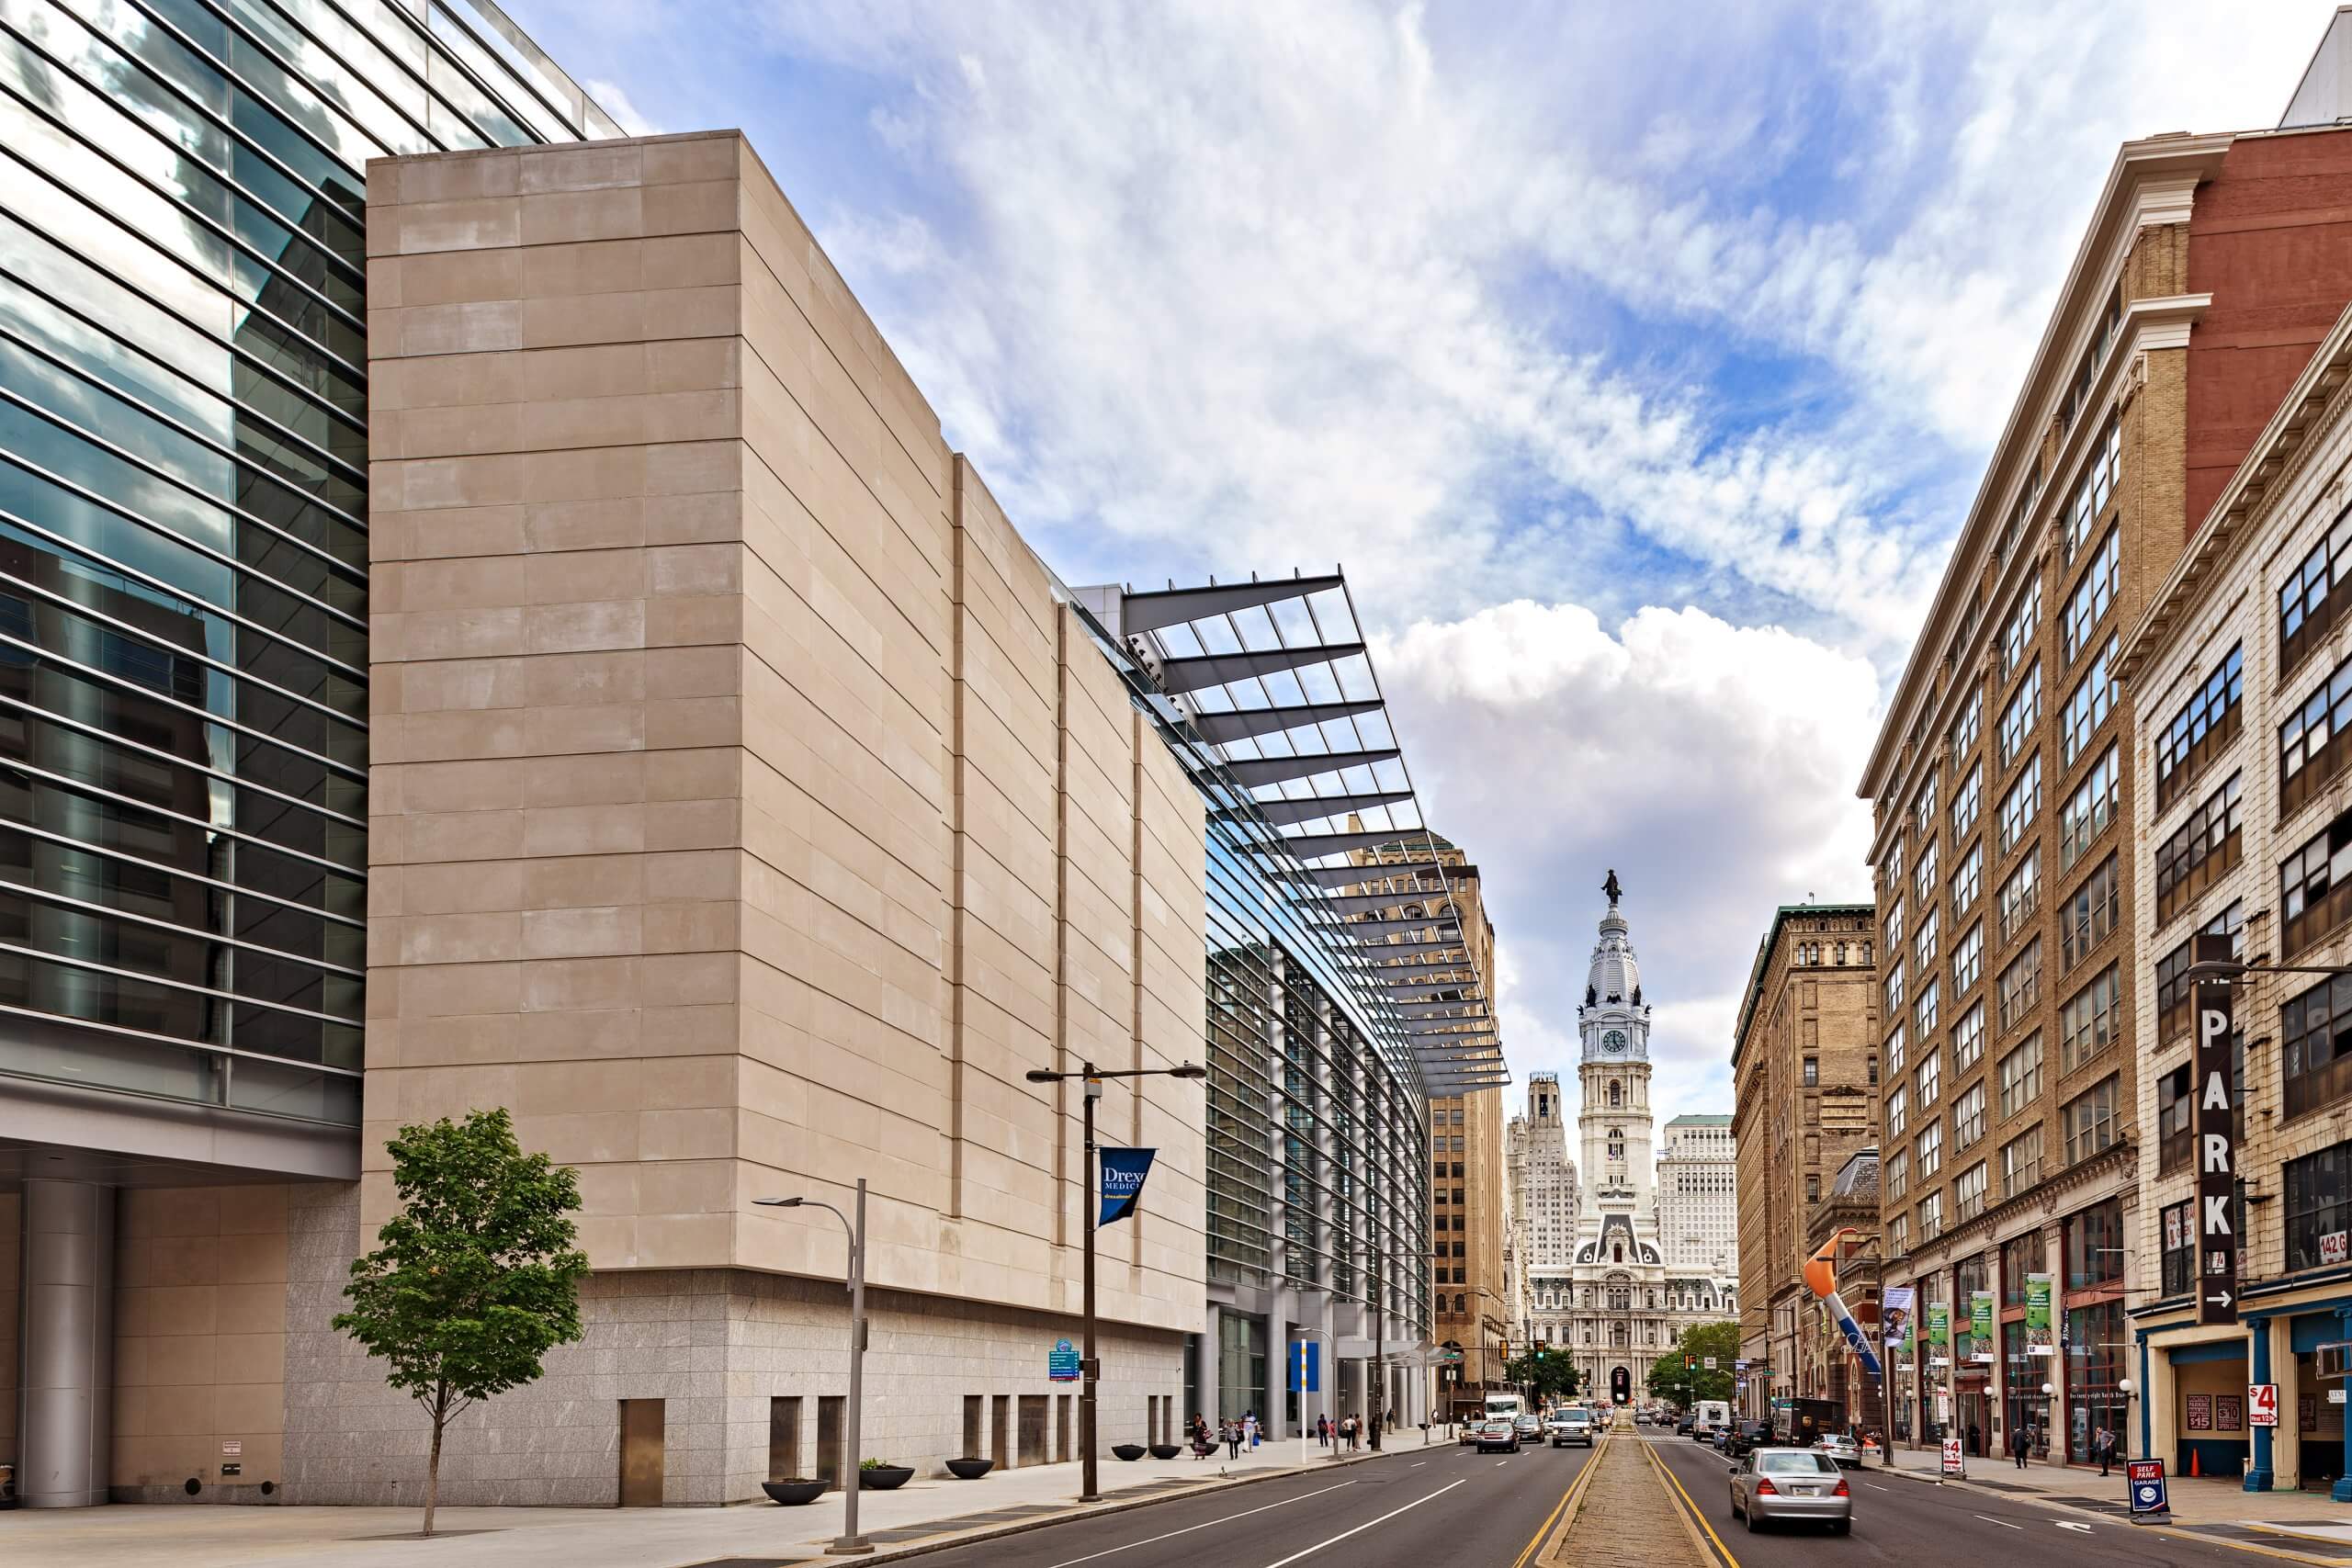 Outside of Pennsylvania Convention Center, a tree is in the bottom left hand corner of the frame, street is shown with a car driving toward City hall in the distance